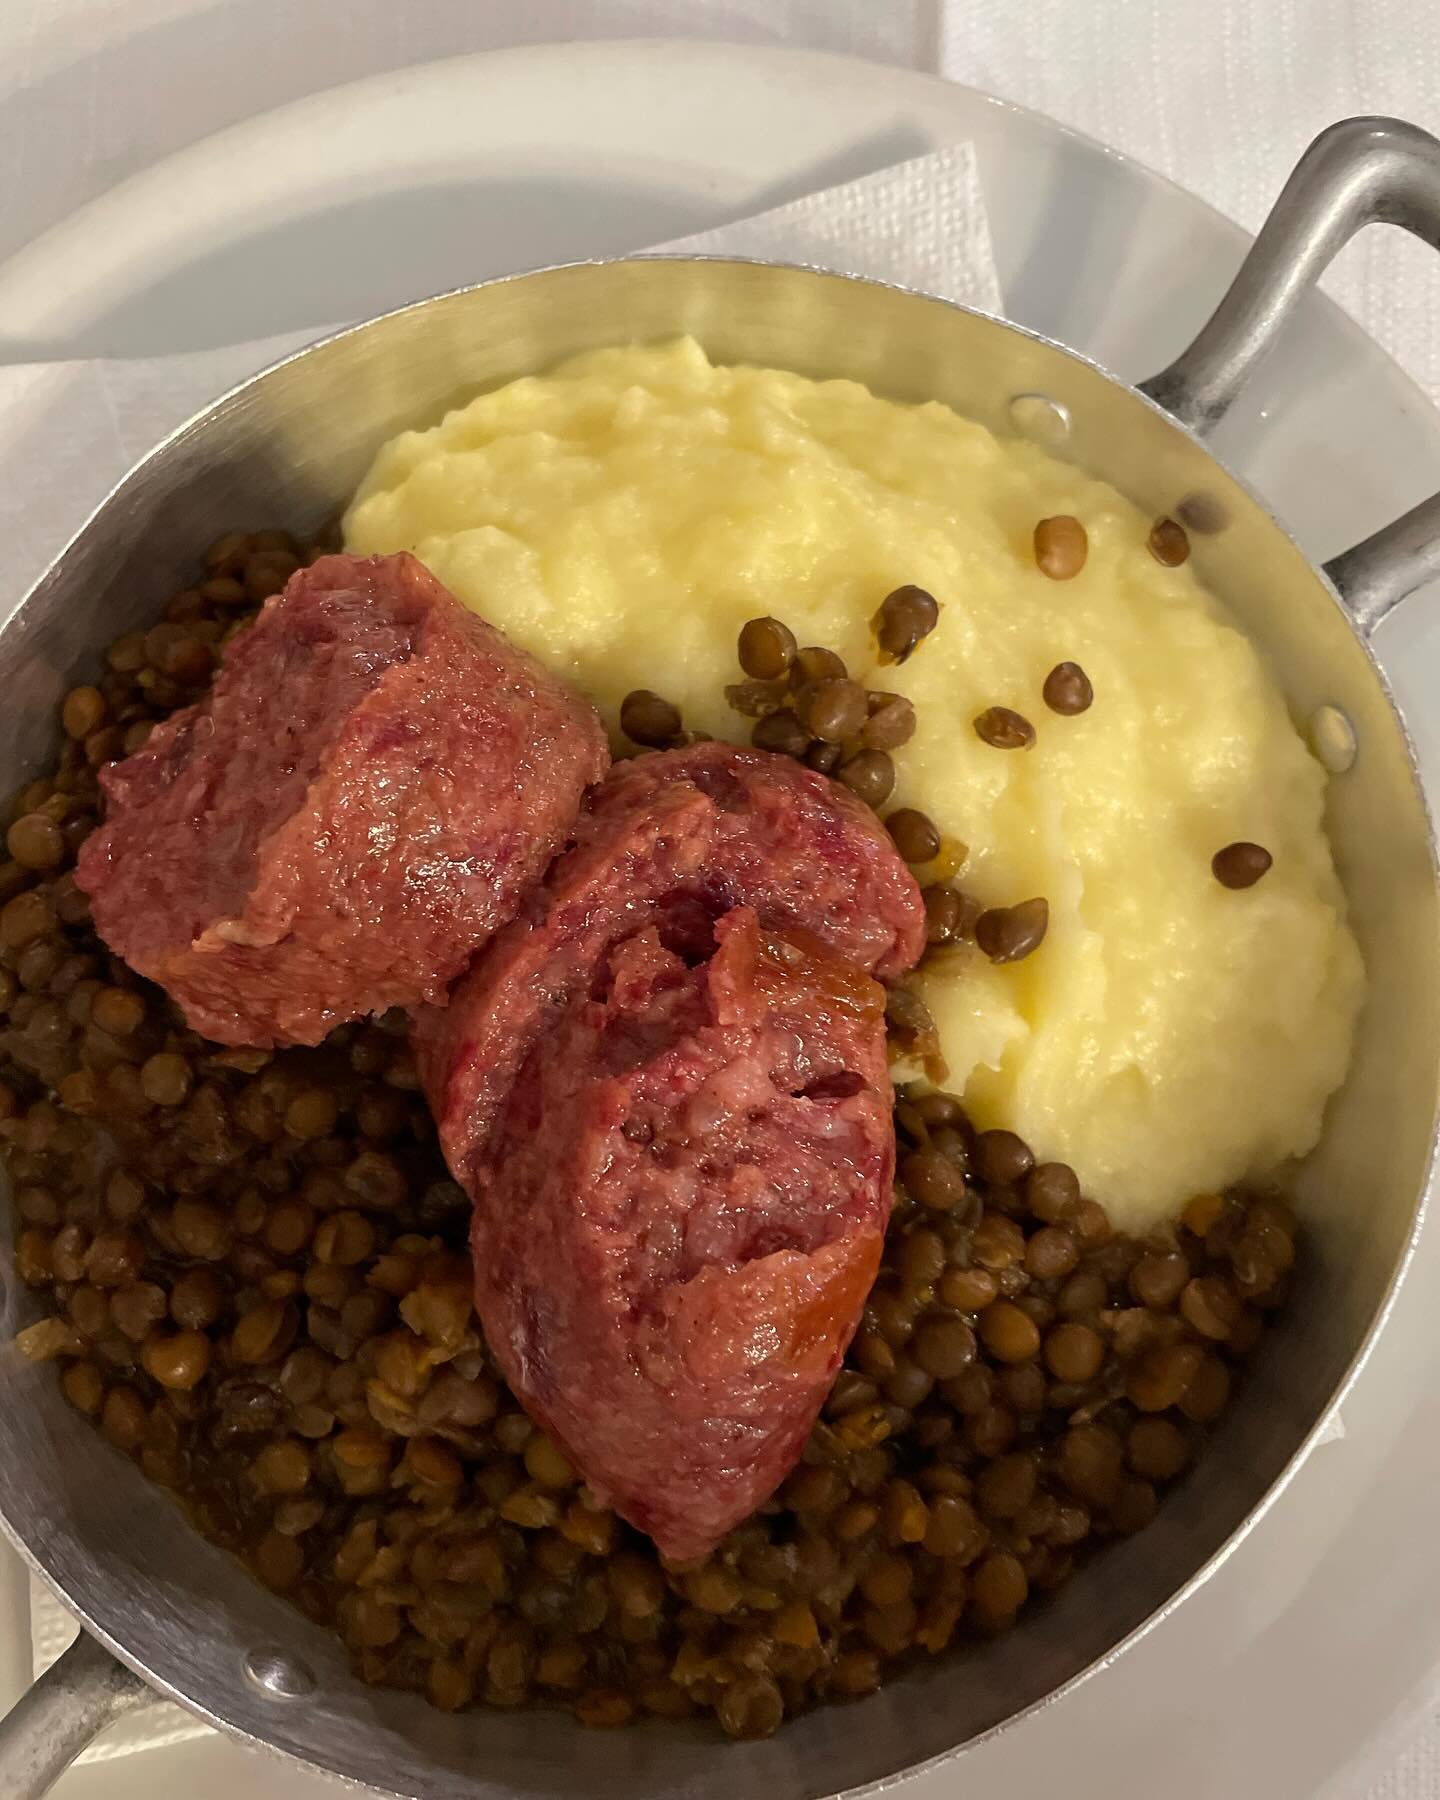 This dish &ldquo;Cotechino pure e lentichie&rdquo; evokes memories of our new Year&rsquo;s dinner coming into 2024 🥲 with @__nick_watts__ @o_f_ficina @hal7474 @michelamarzan Now we are living our new life in Italy eating this same dish, the emotions